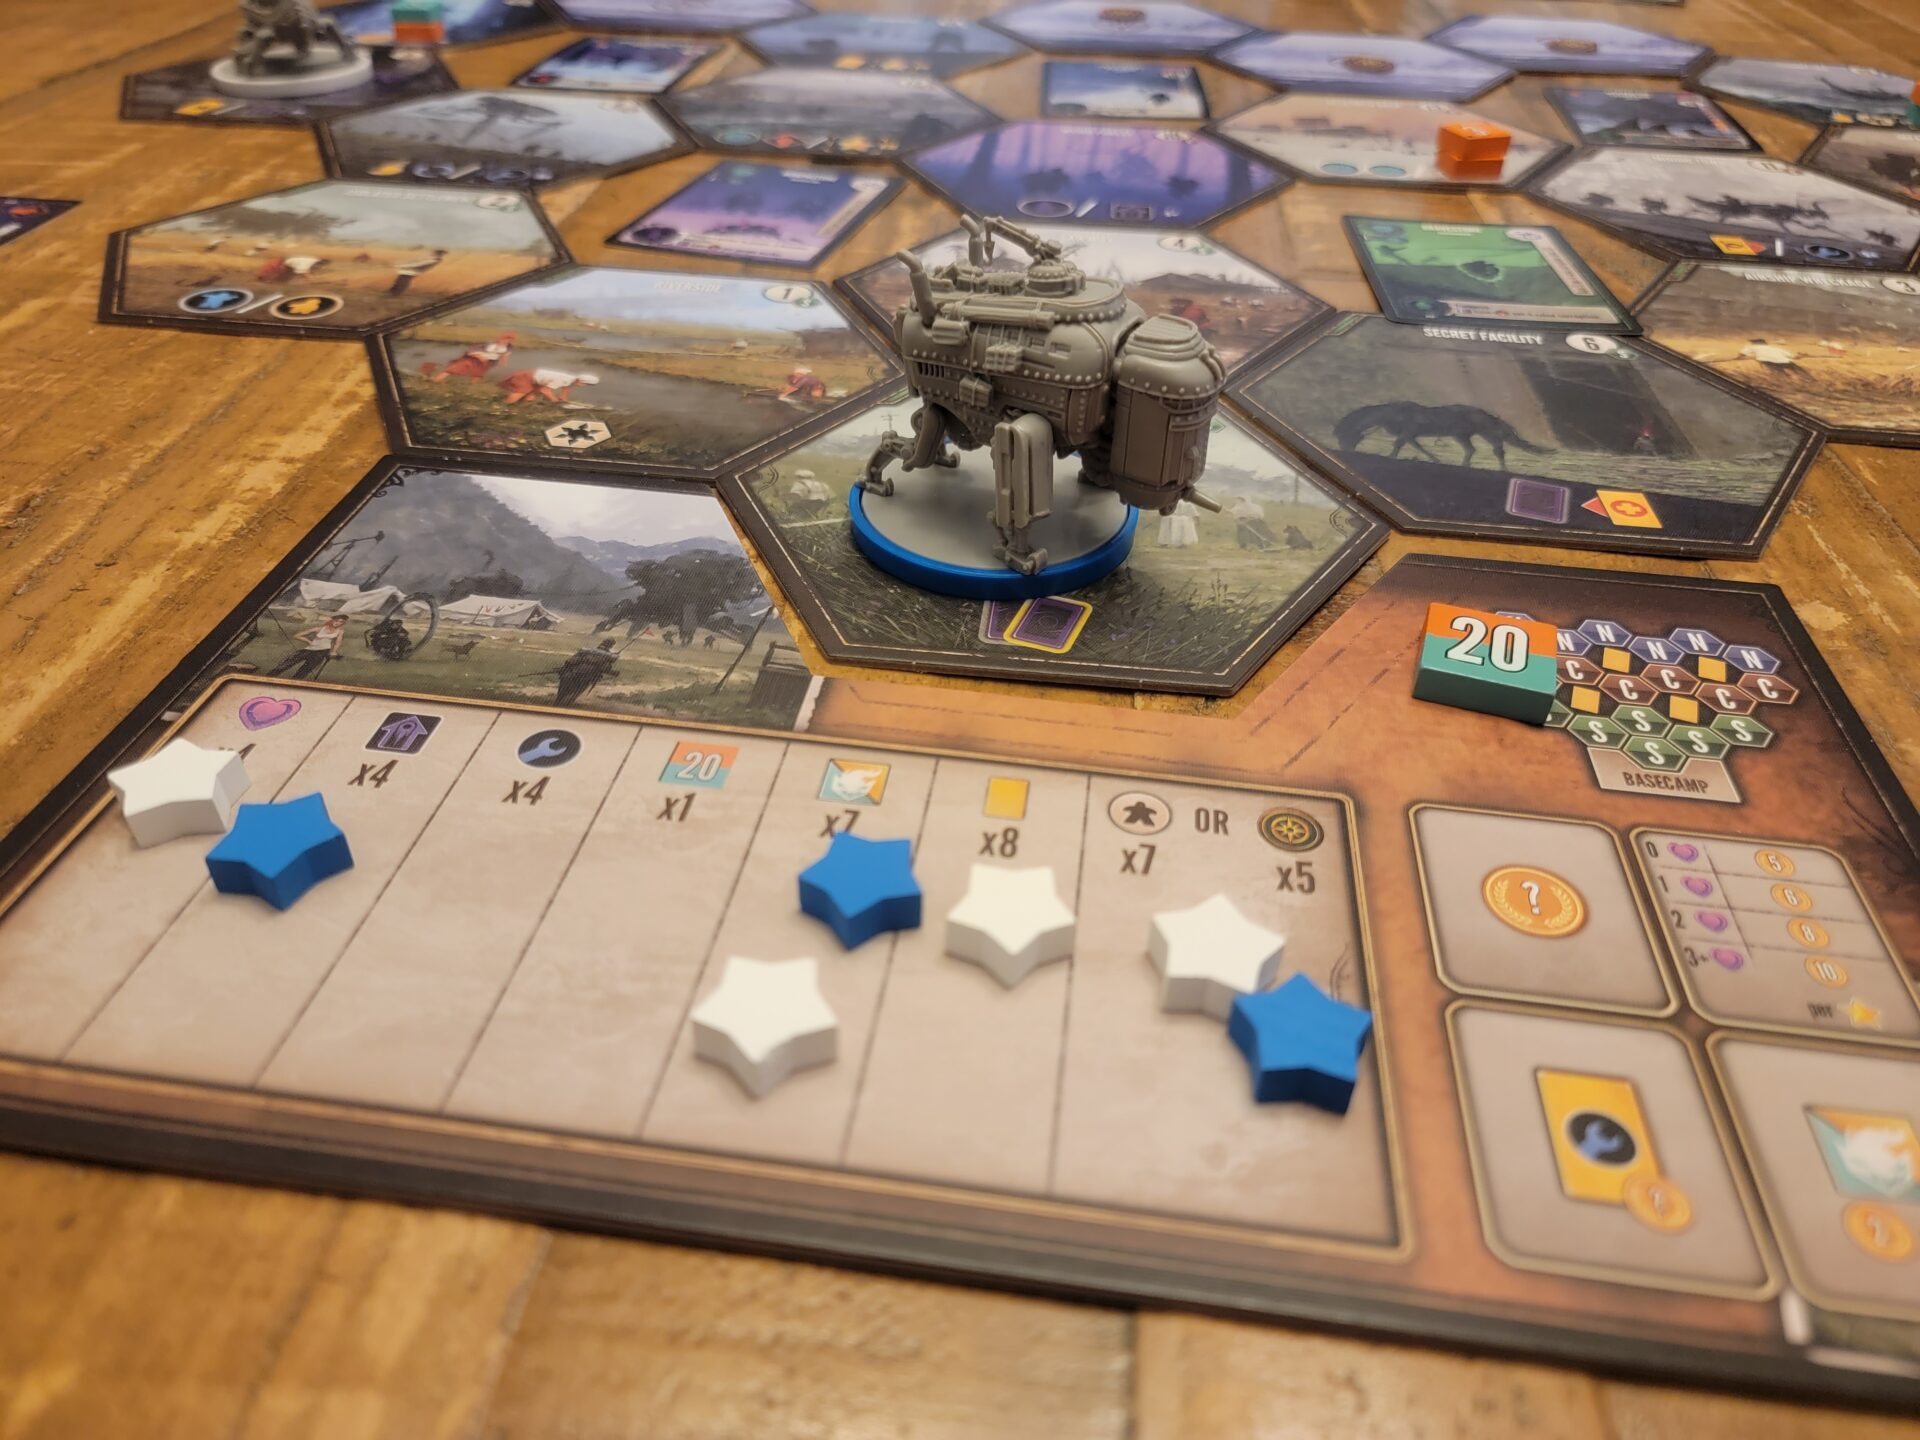 Expeditions player board on a table during the game.